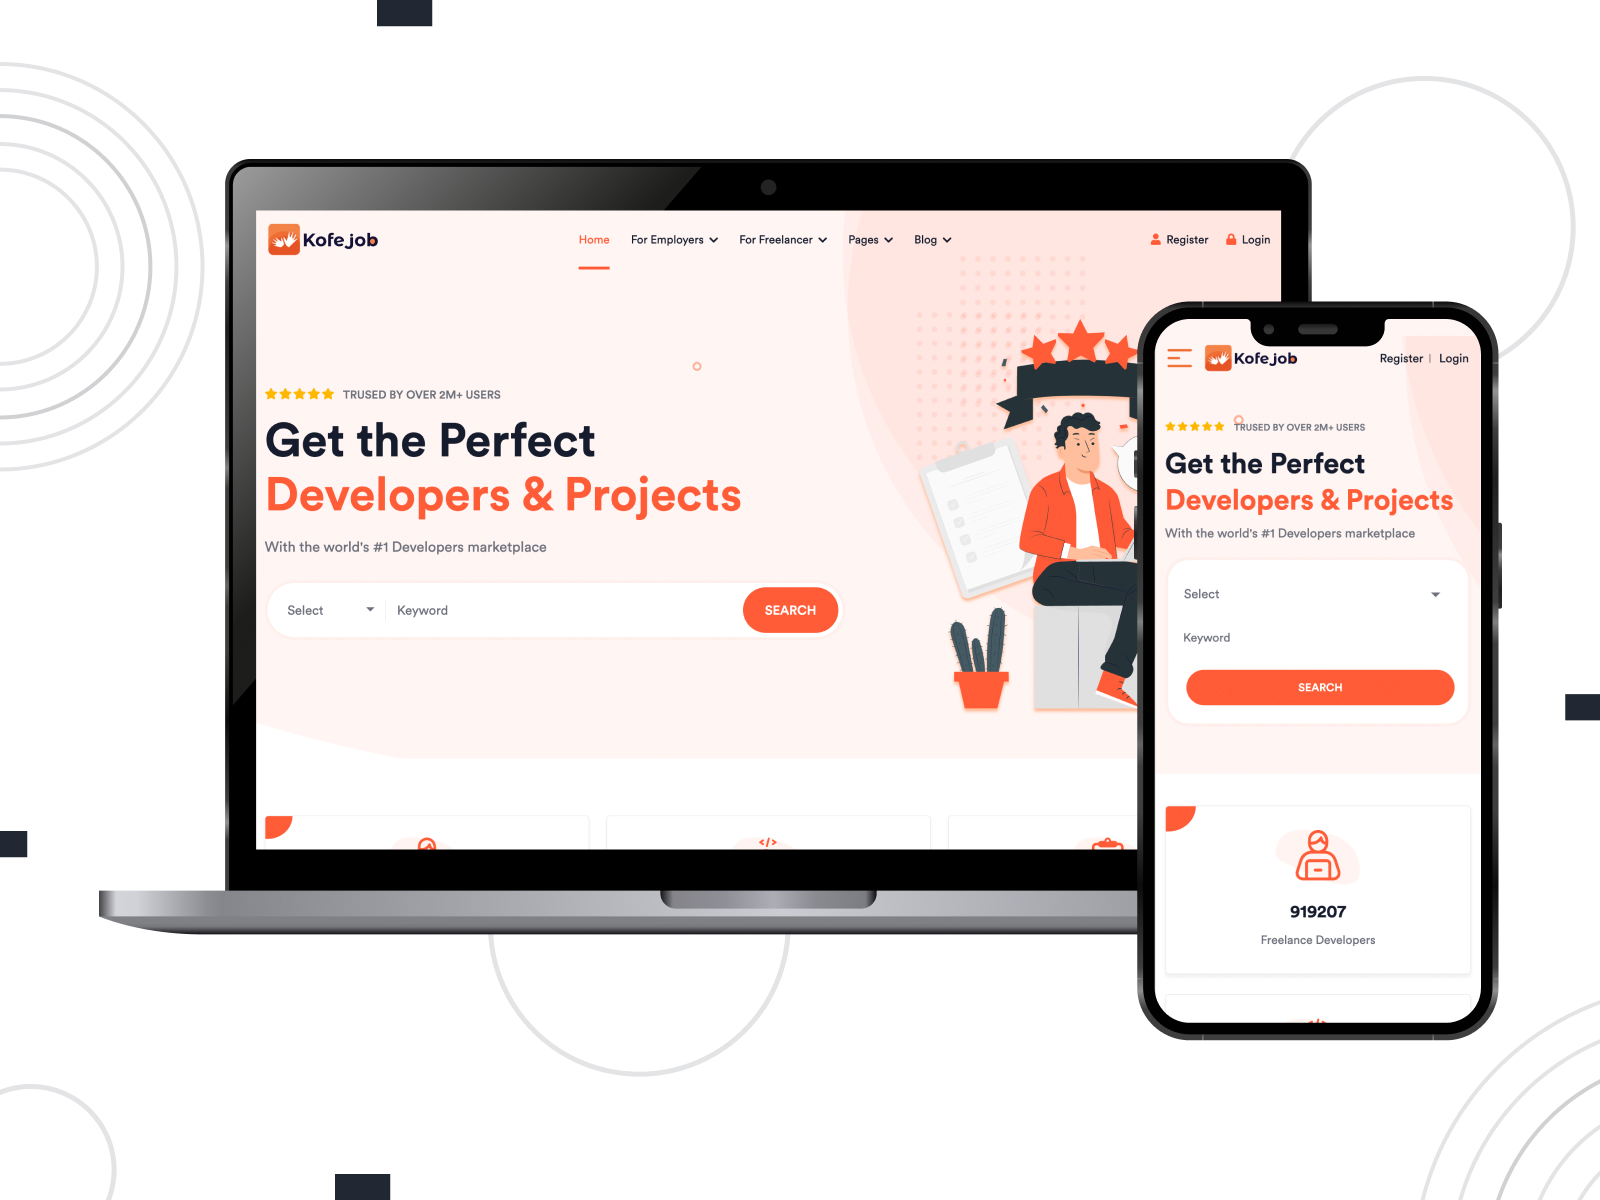 Graphic of Kofejob, one of the best SaaS WordPress themes for collaboration platforms delivering a marketplace for freelancers.